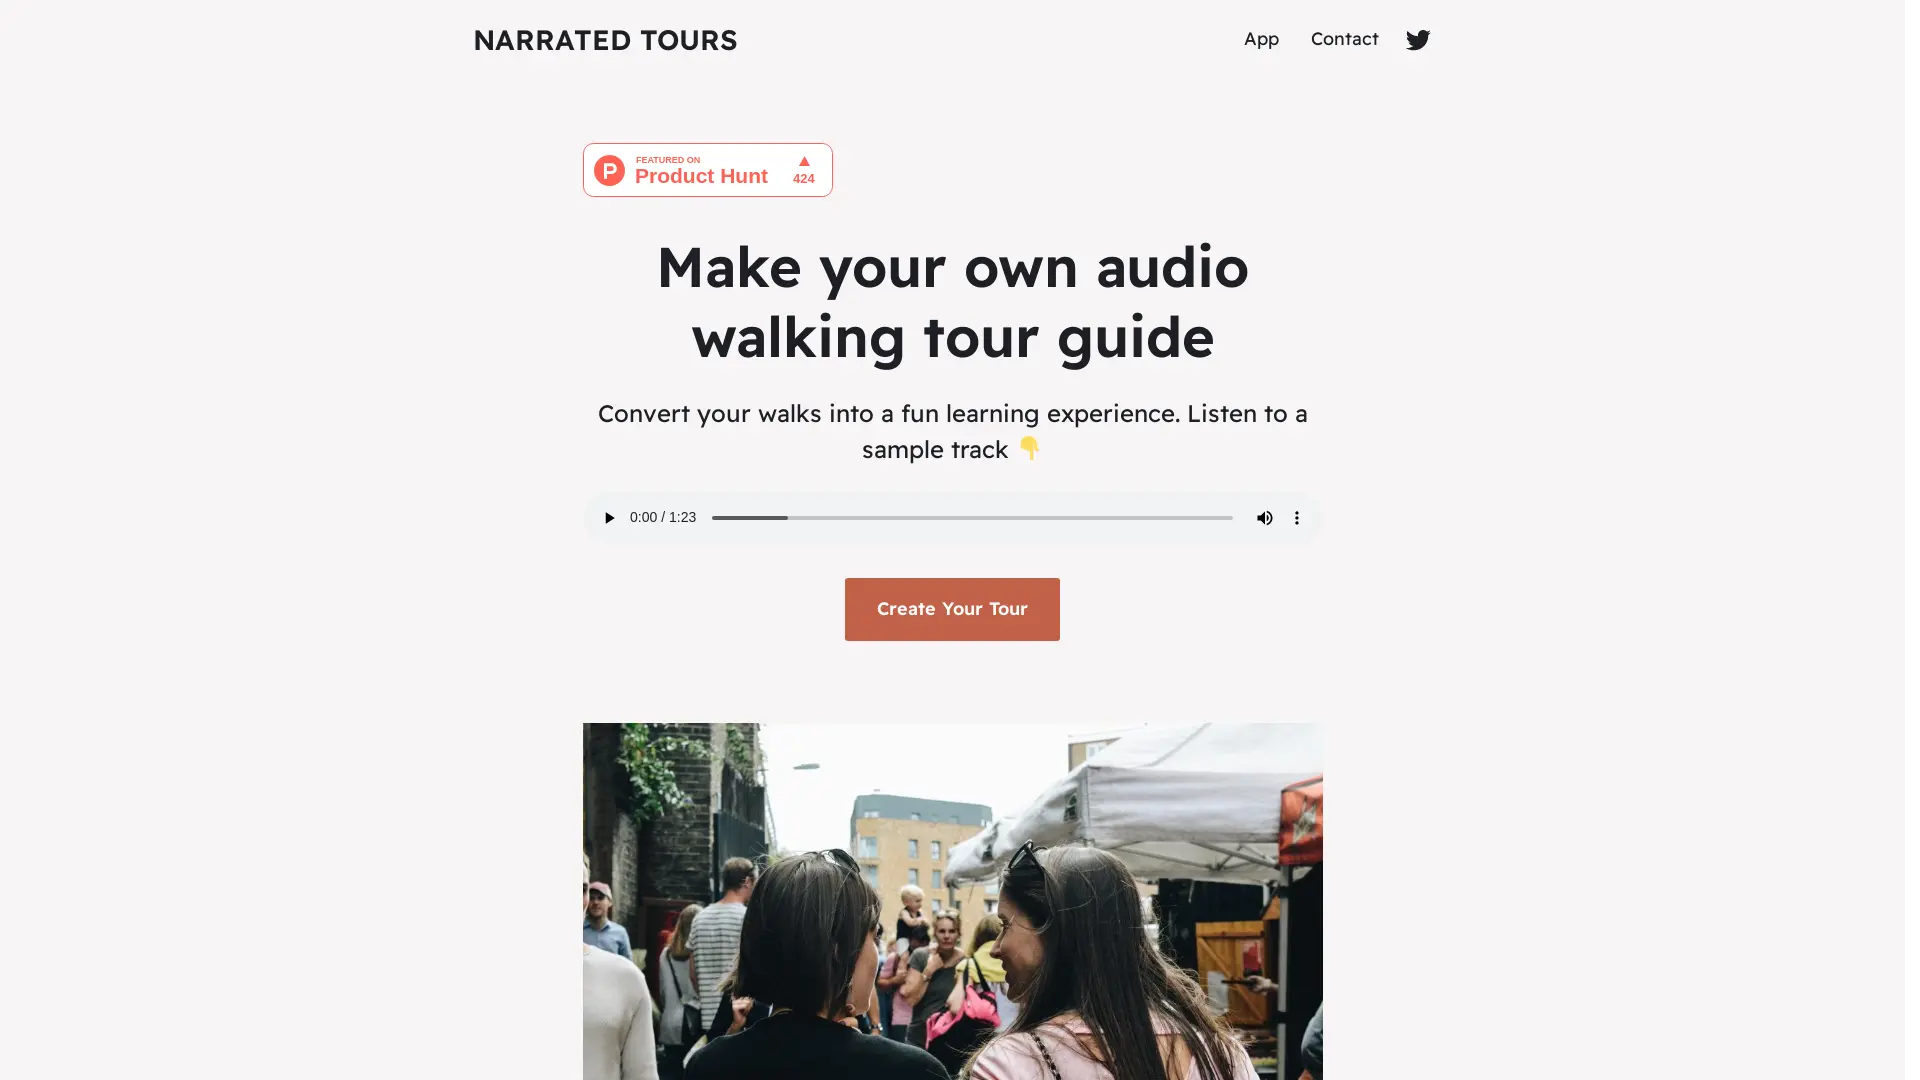 Narrated Tours